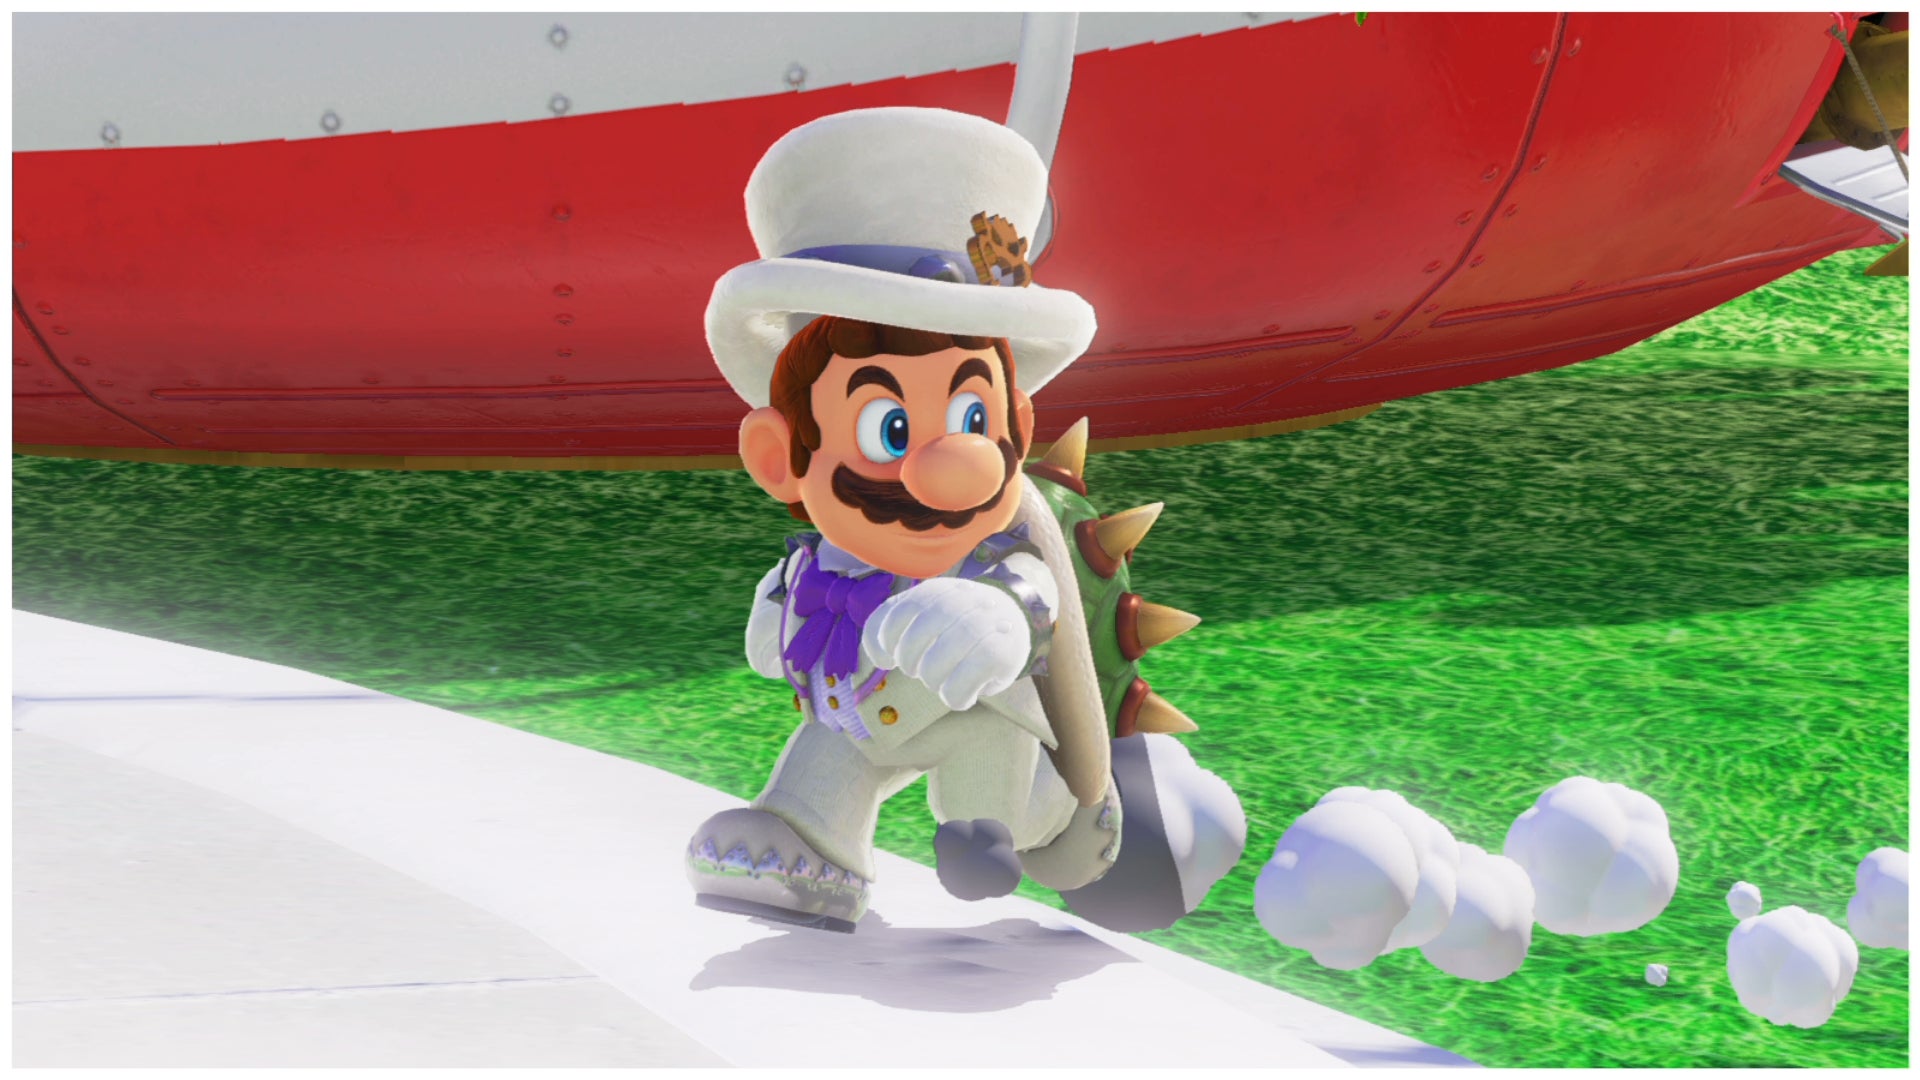 Image for Switch overtakes Wii U lifetime sales as Super Mario Odyssey hits 9 million units sold